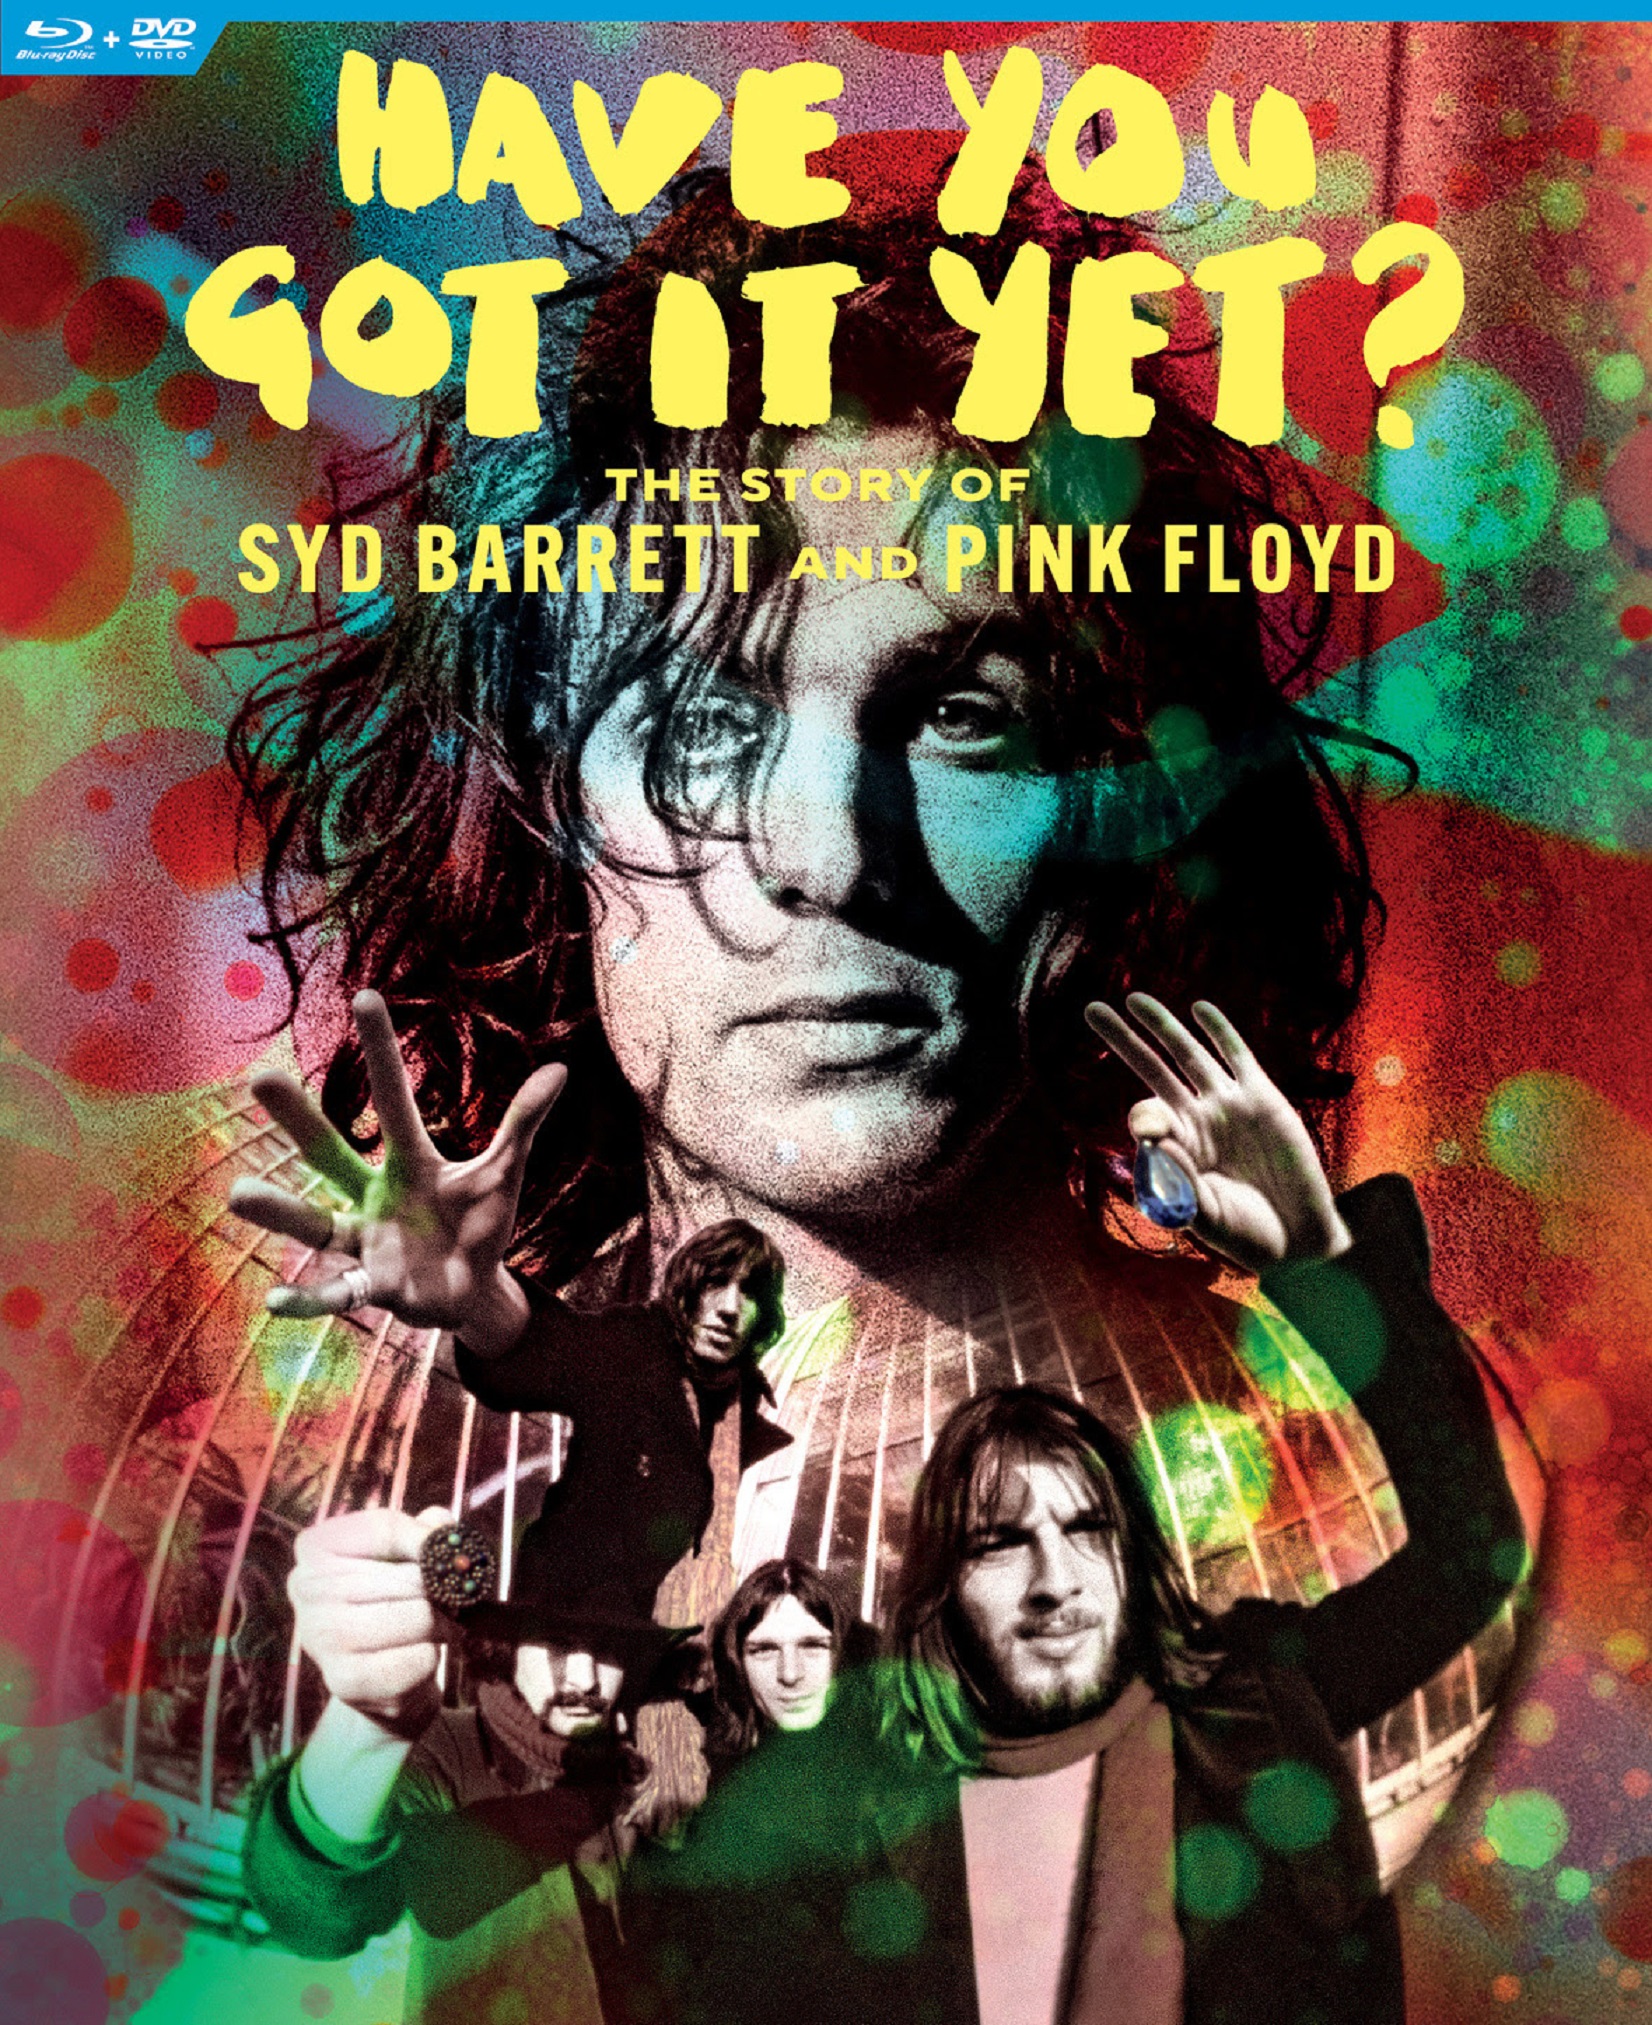 "HAVE YOU GOT IT YET?" THE STORY OF SYD BARRETT AND PINK FLOYD OUT JULY 19